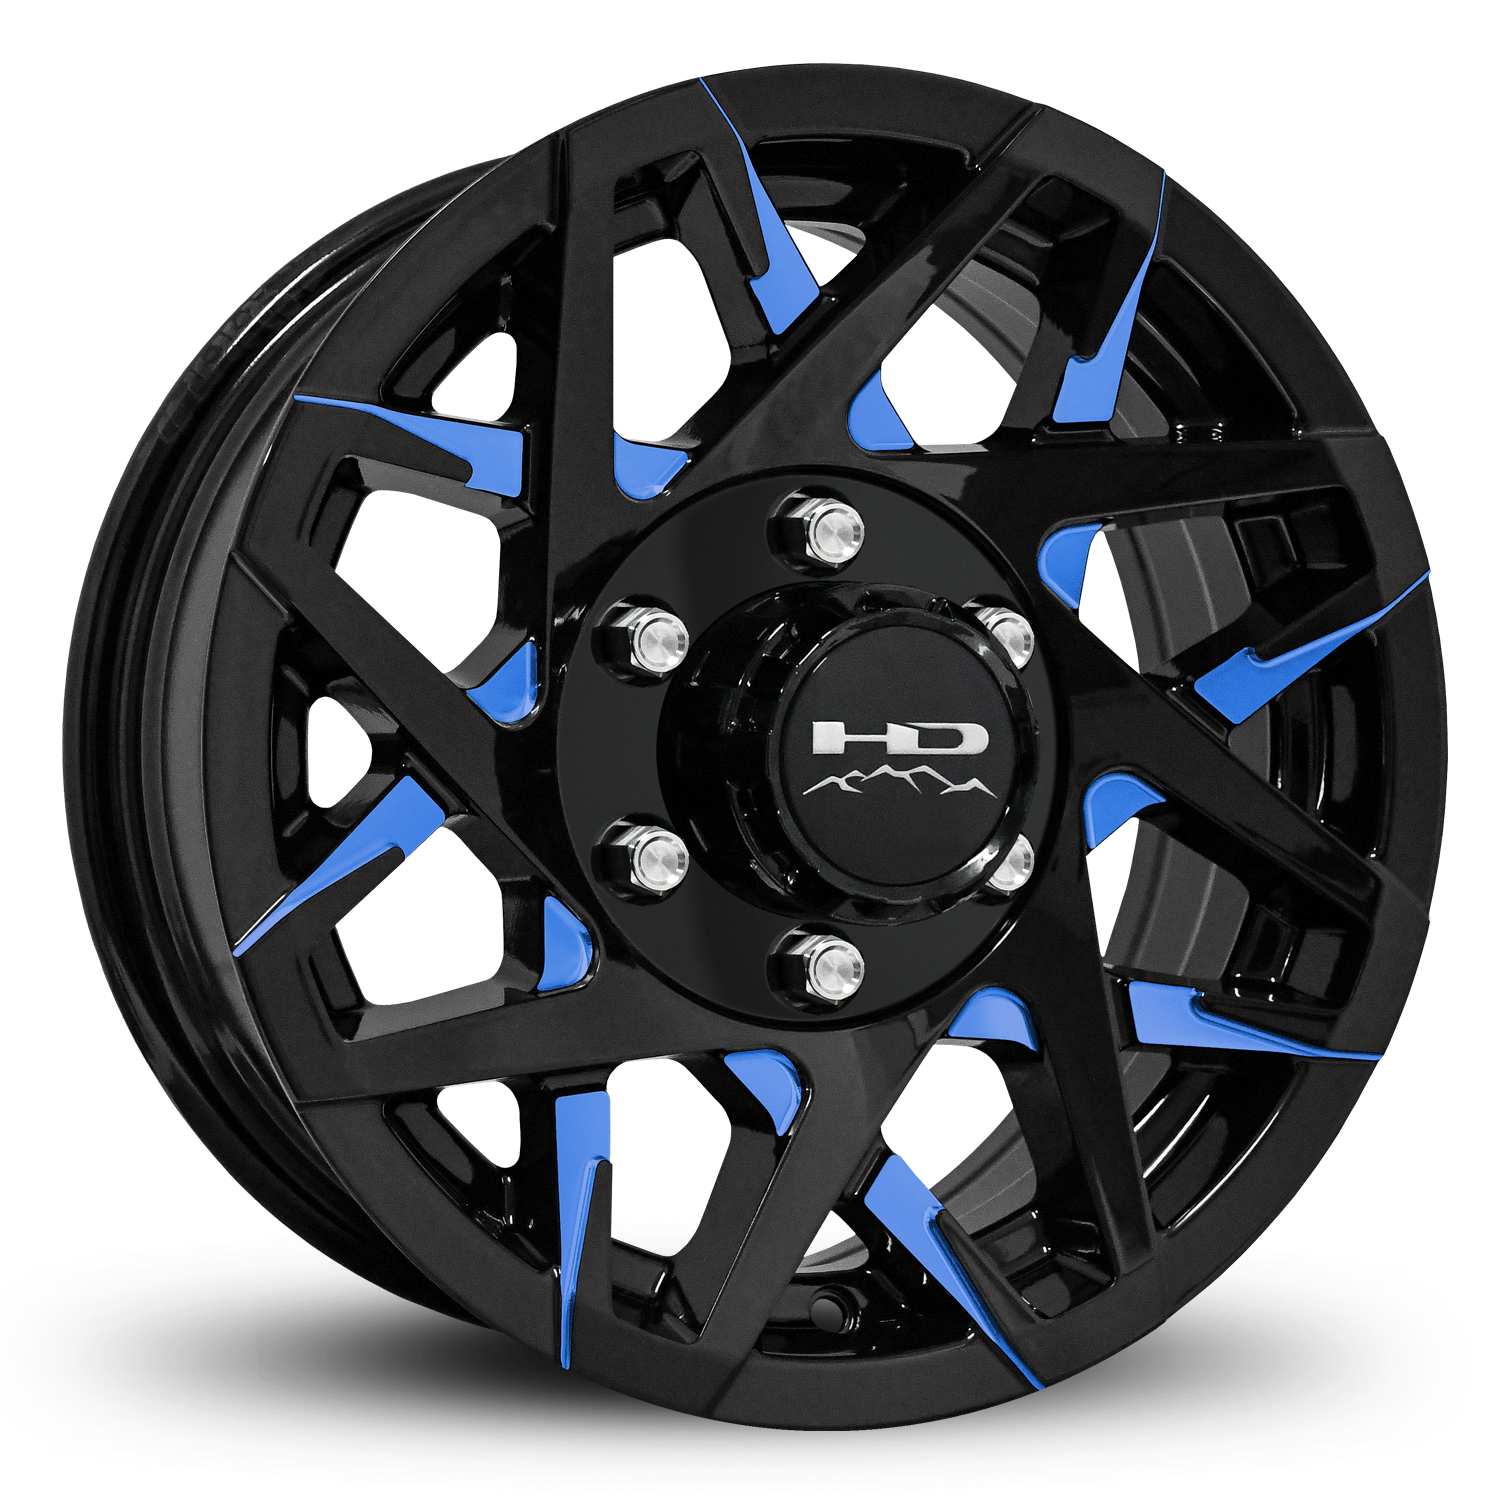 HD Off-Road Canyon Blue Custom Trailer Wheel Rims in 16x6.0 16x6 Gloss Black CNC Milled Face Spokes with Center Cap & Logo fits 6x139.7 / 6x5.50 Axle Boat, Car, RV, Travel, Concession, Horse, Utility, Lawn & Garden, & Landscaping.